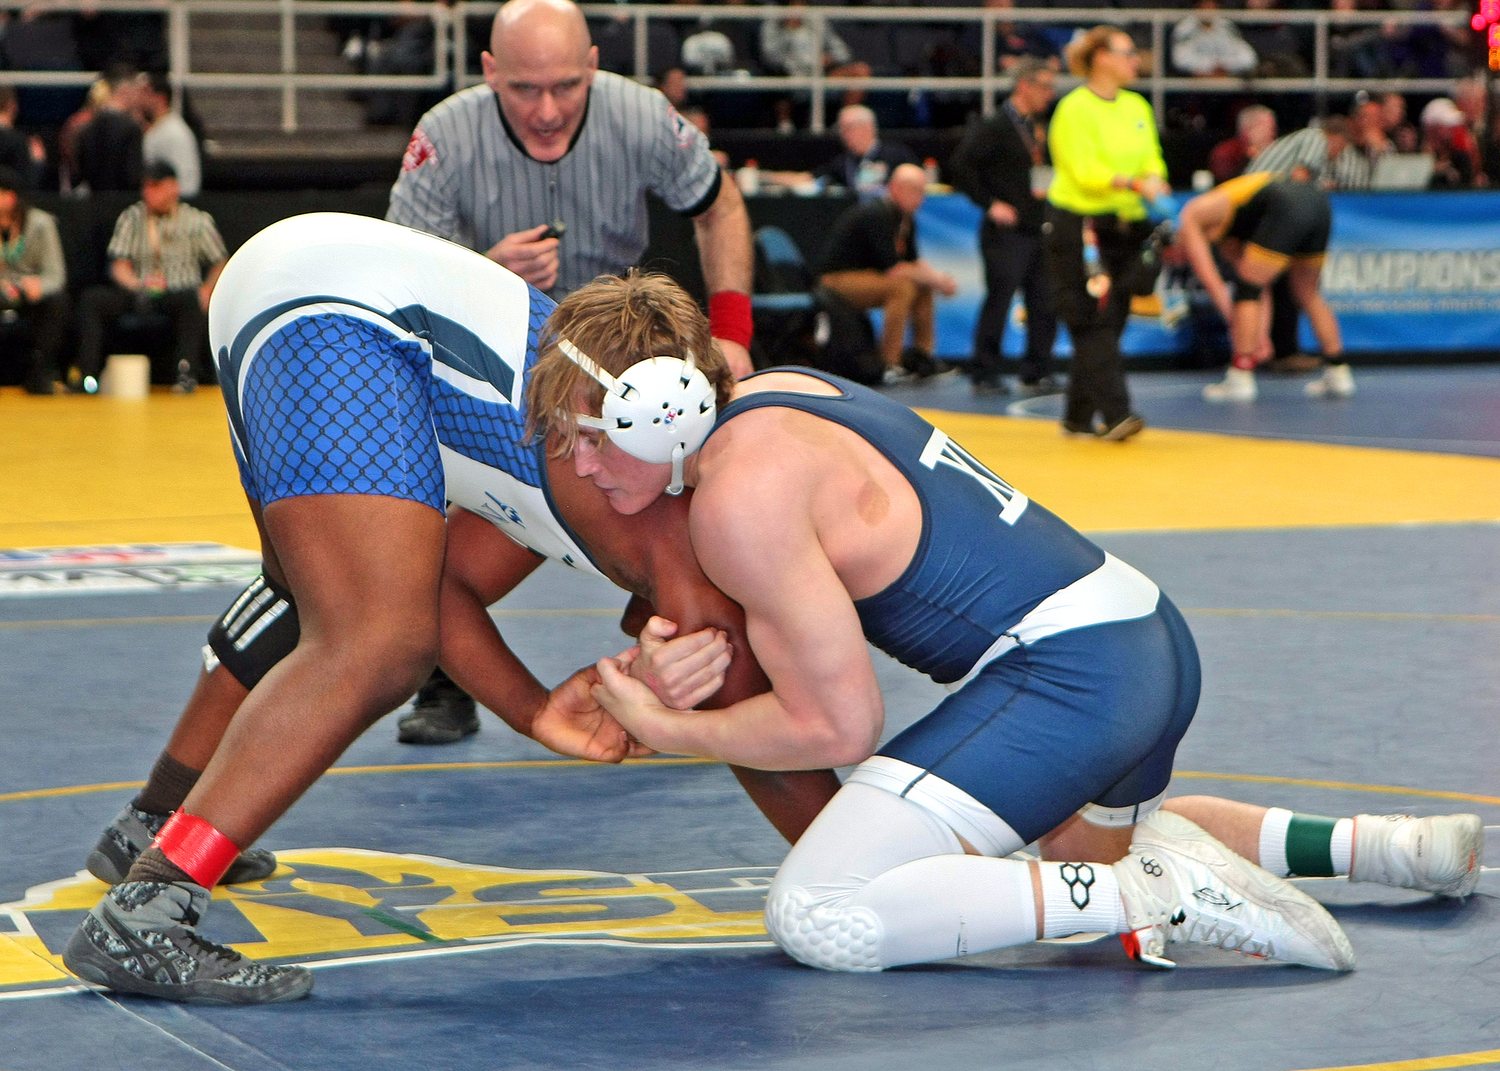 Southampton senior Cole Fox working against Ivan Dolphan of Horace Mann in their wrestleback match on Friday.   RAY NELSON